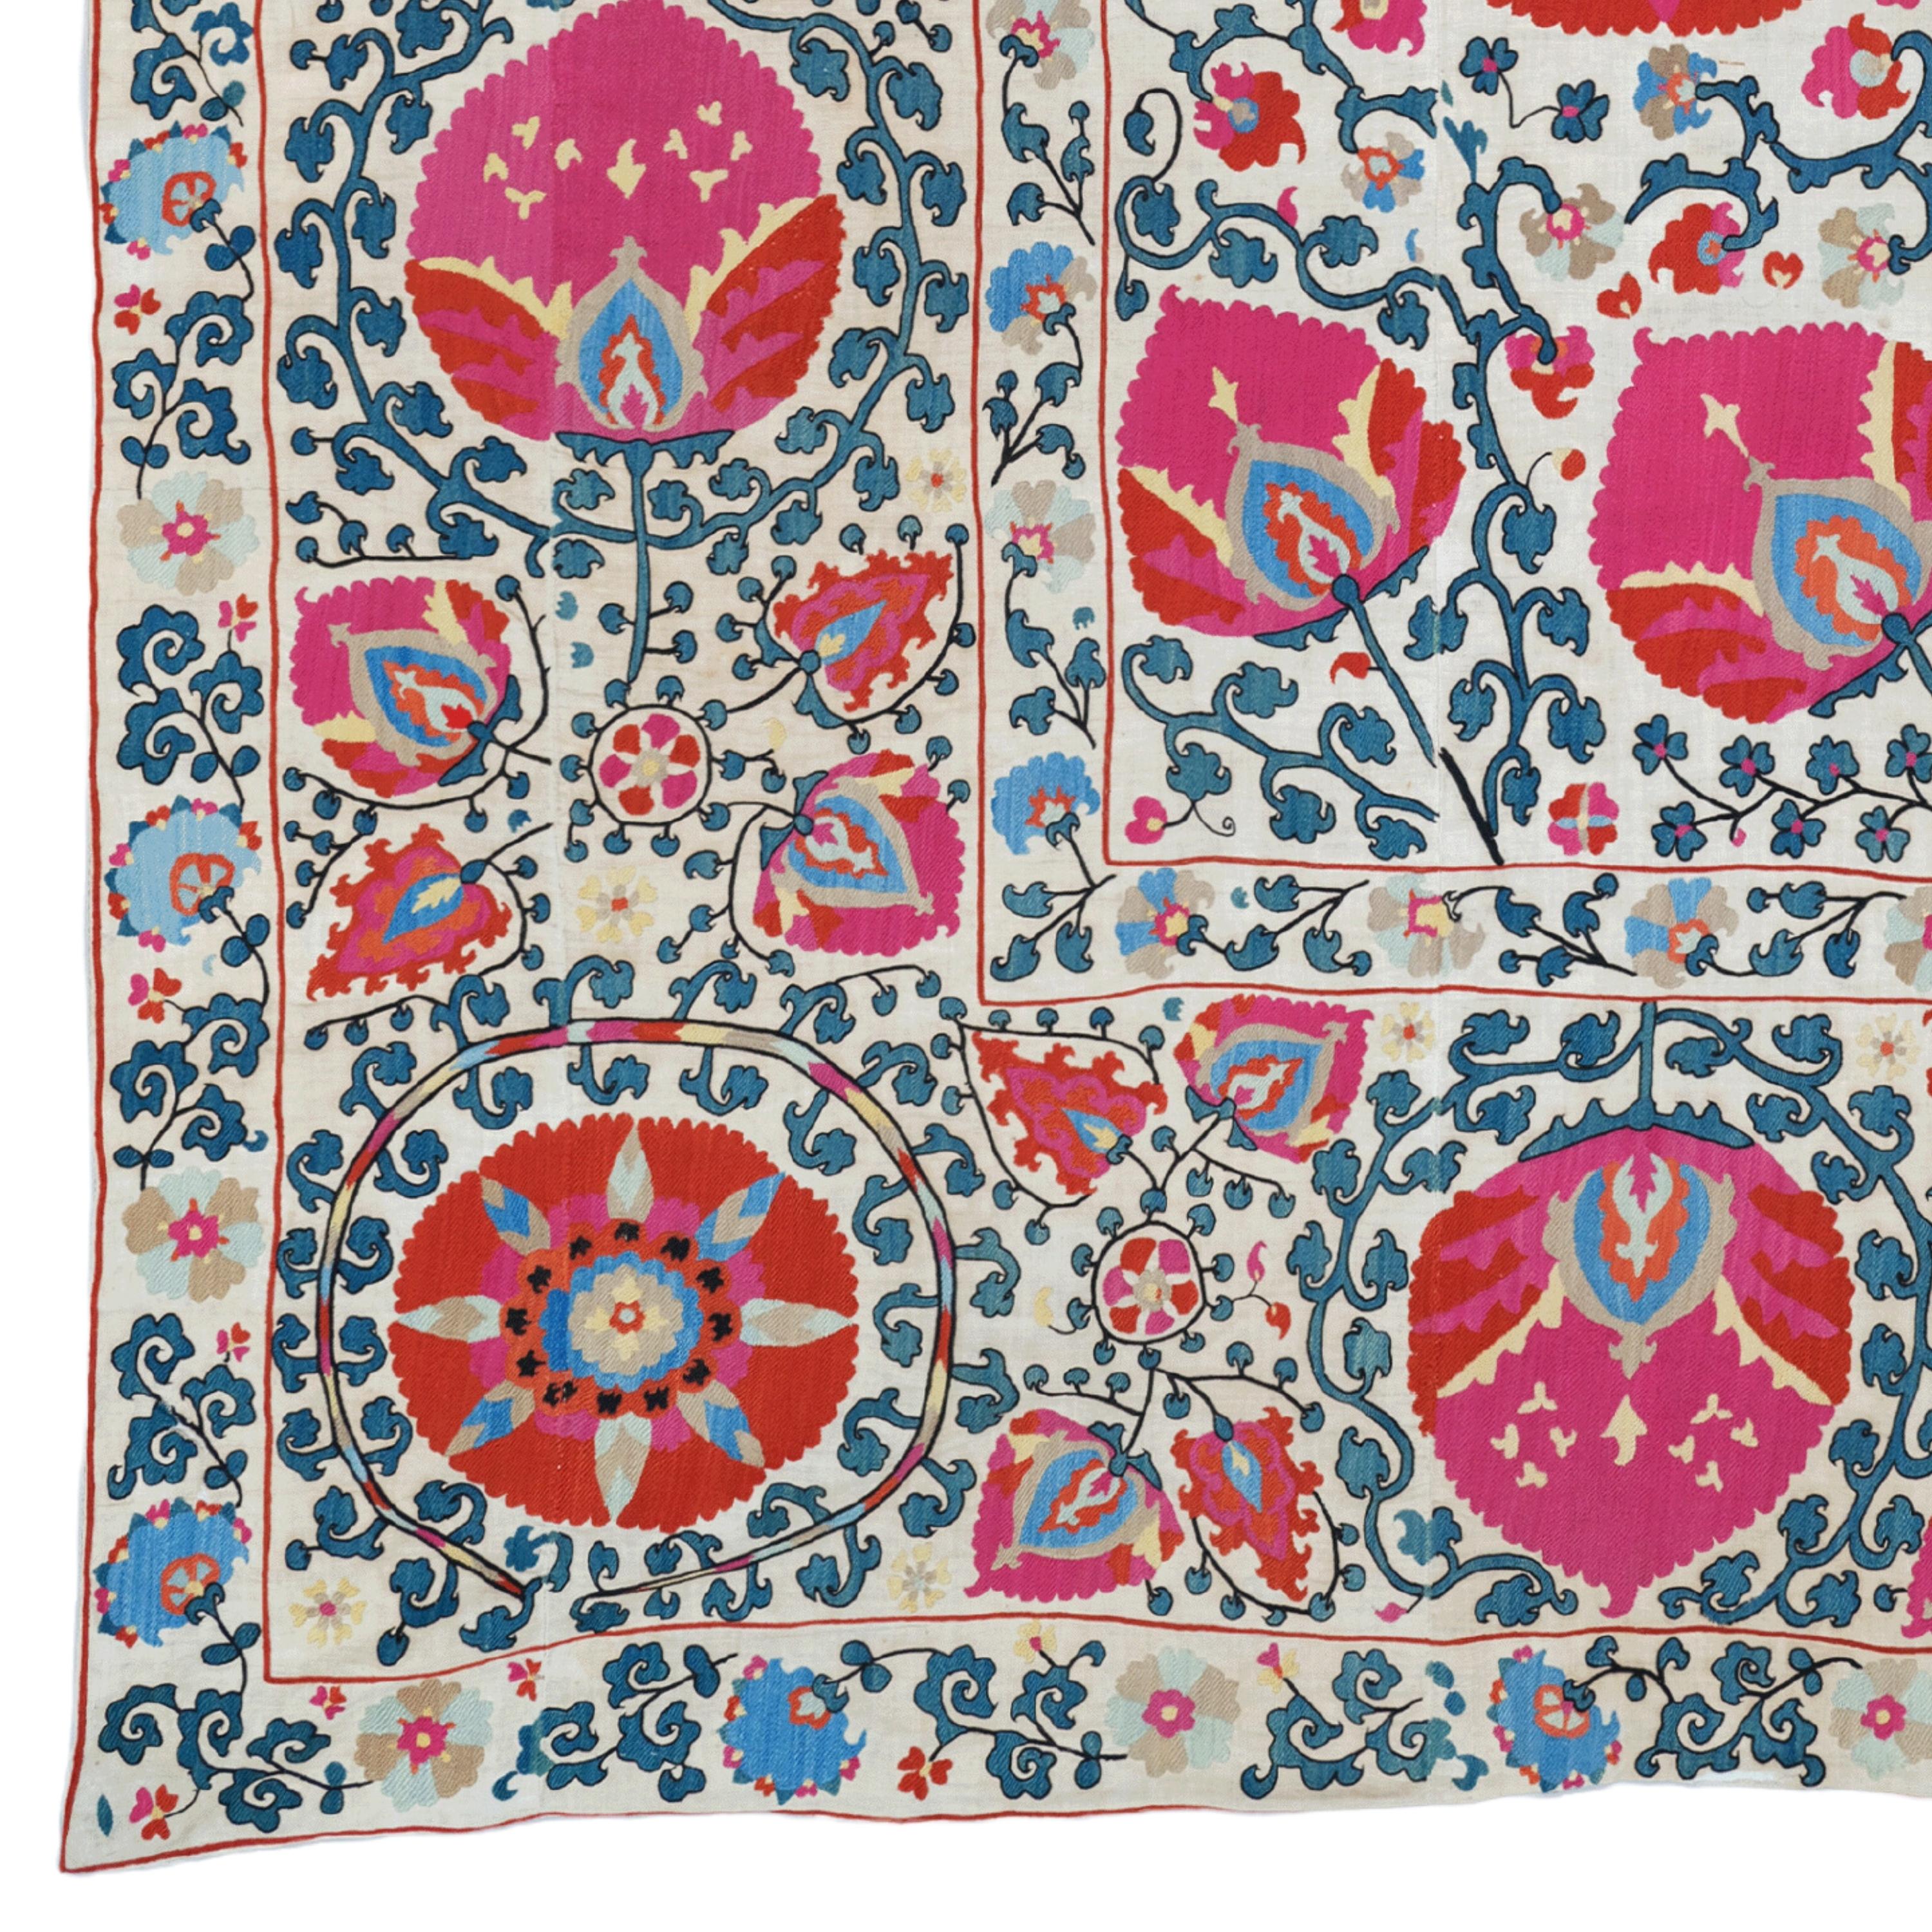 Early 19th Century Uzbekistan Shahrisyabz Suzani

Silk on cotton ground. Exhibited: The Textile Museum, 27 Sept. 1996 to 23 Feb. 1997. See Plate 18, Khans, Nomads & Needlework  Suzanis and Embroideries of Central Asia, 2012. “This spectacular suzani